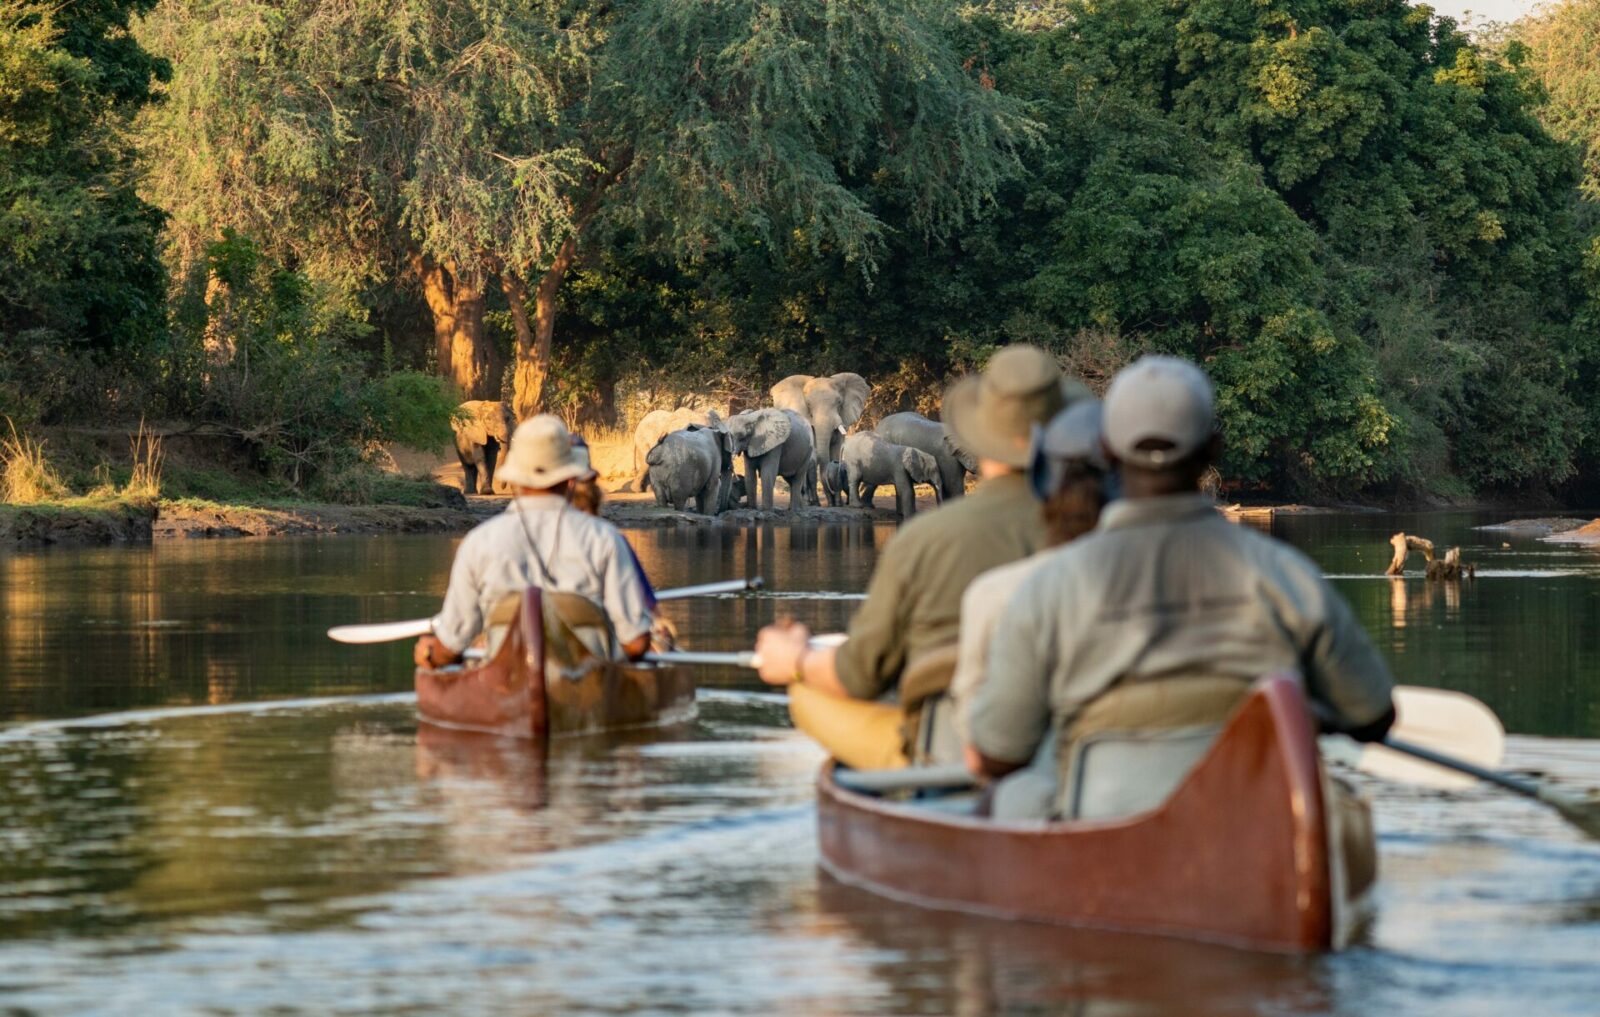 Image of canoeing at Chongwe Camp in the Lower Zambezi National Park. 2 Canoes are visible each carrying a guest and guide. A herd of elephants can be seen on the river bank. Courtesy of Time + Tide | True Africa | Blog | Time + Tide